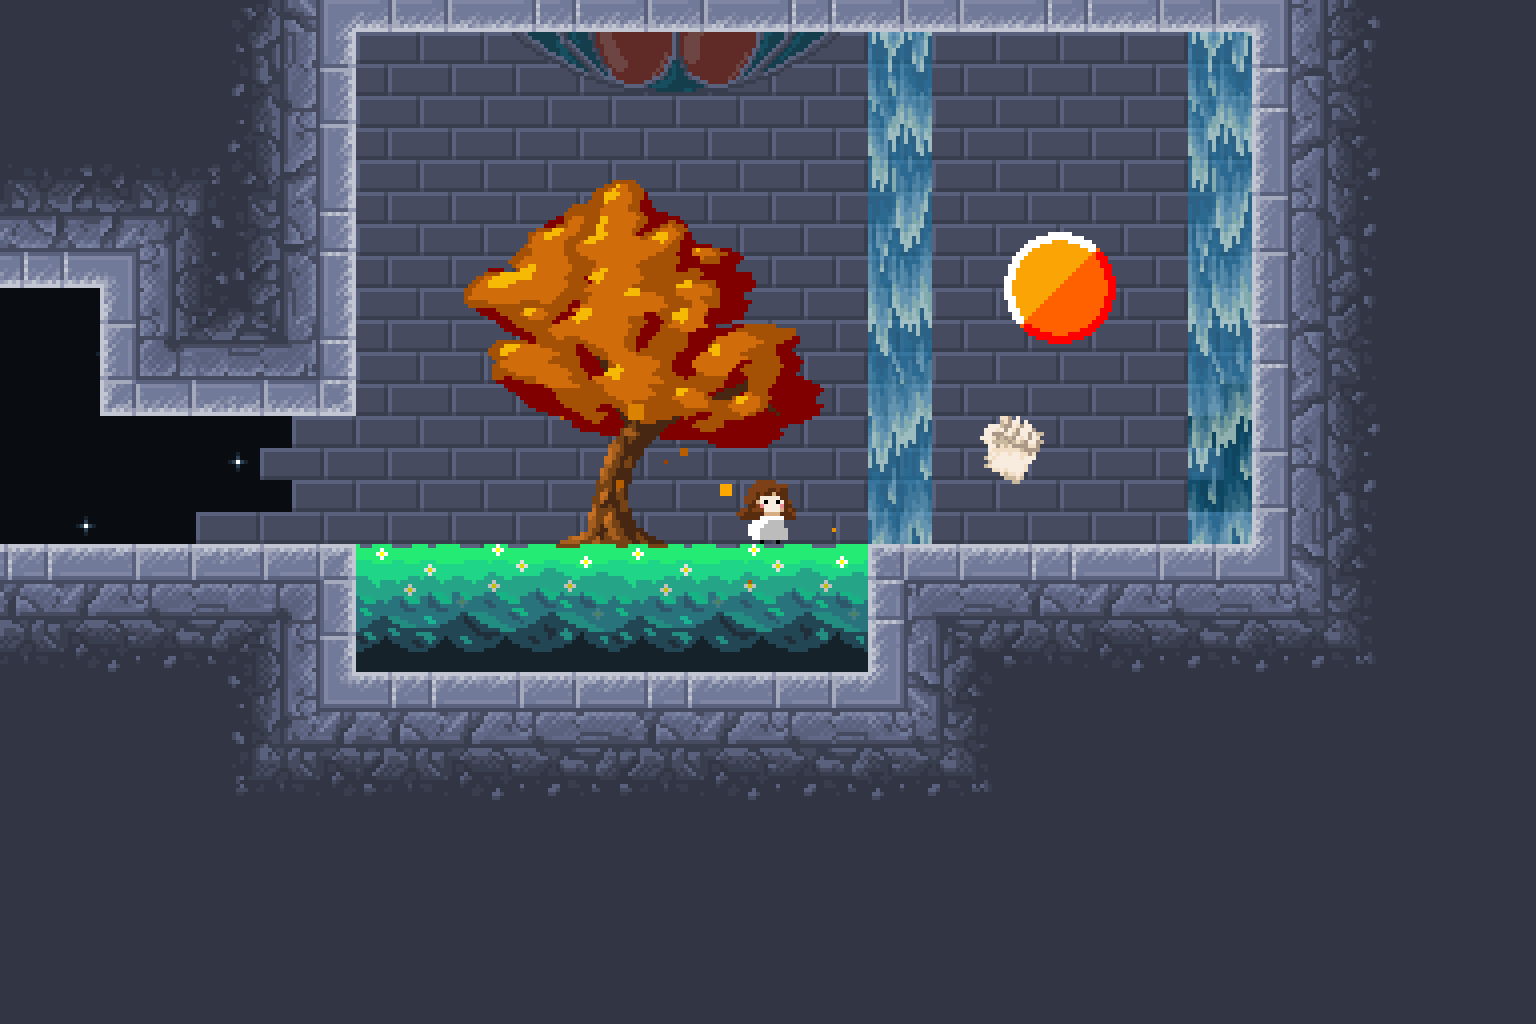 screenshot: Vivi is inside a castle, standing under a tree. Next to her is a pair of waterfalls, with a giant coin between them.